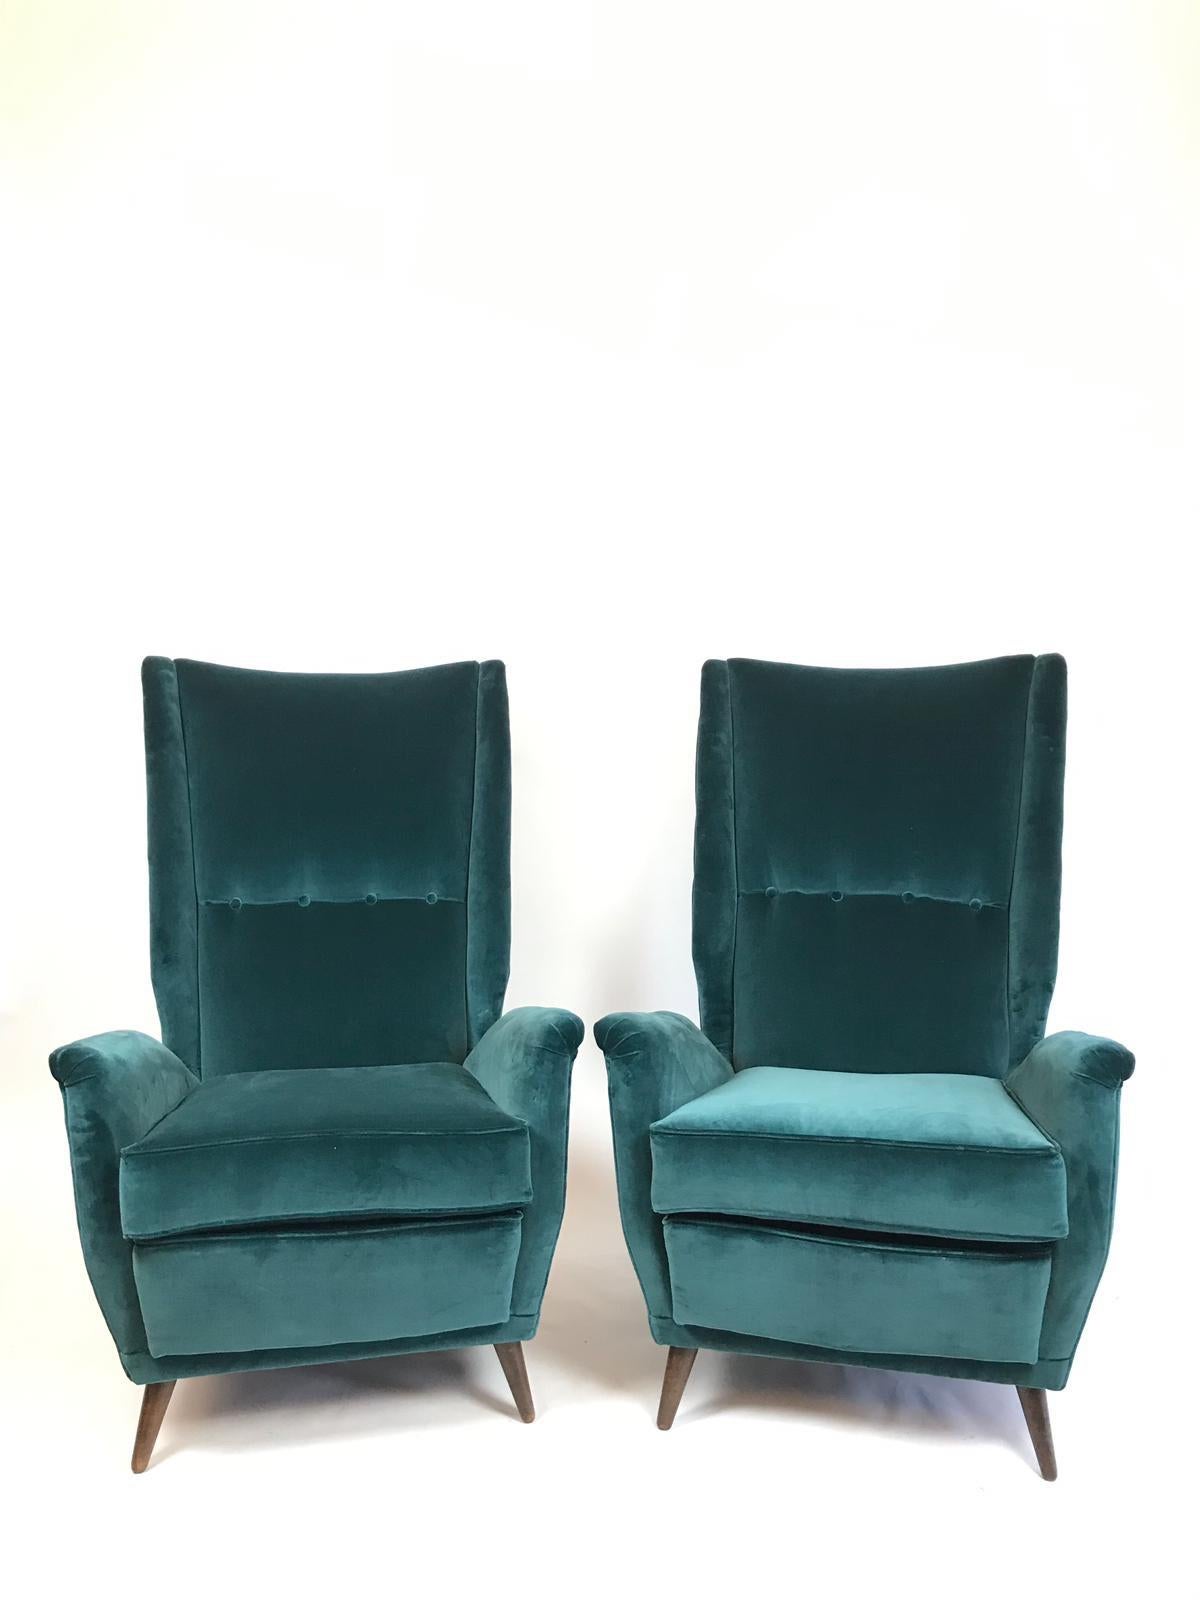 A magnificent and elegant pair of Gio Ponti newly upholstered high back armchairs in fine teal velvet.
The chairs are designed with beautiful lines with indented sides and buttoned backs standing on their original walnut feet. These armchairs can be